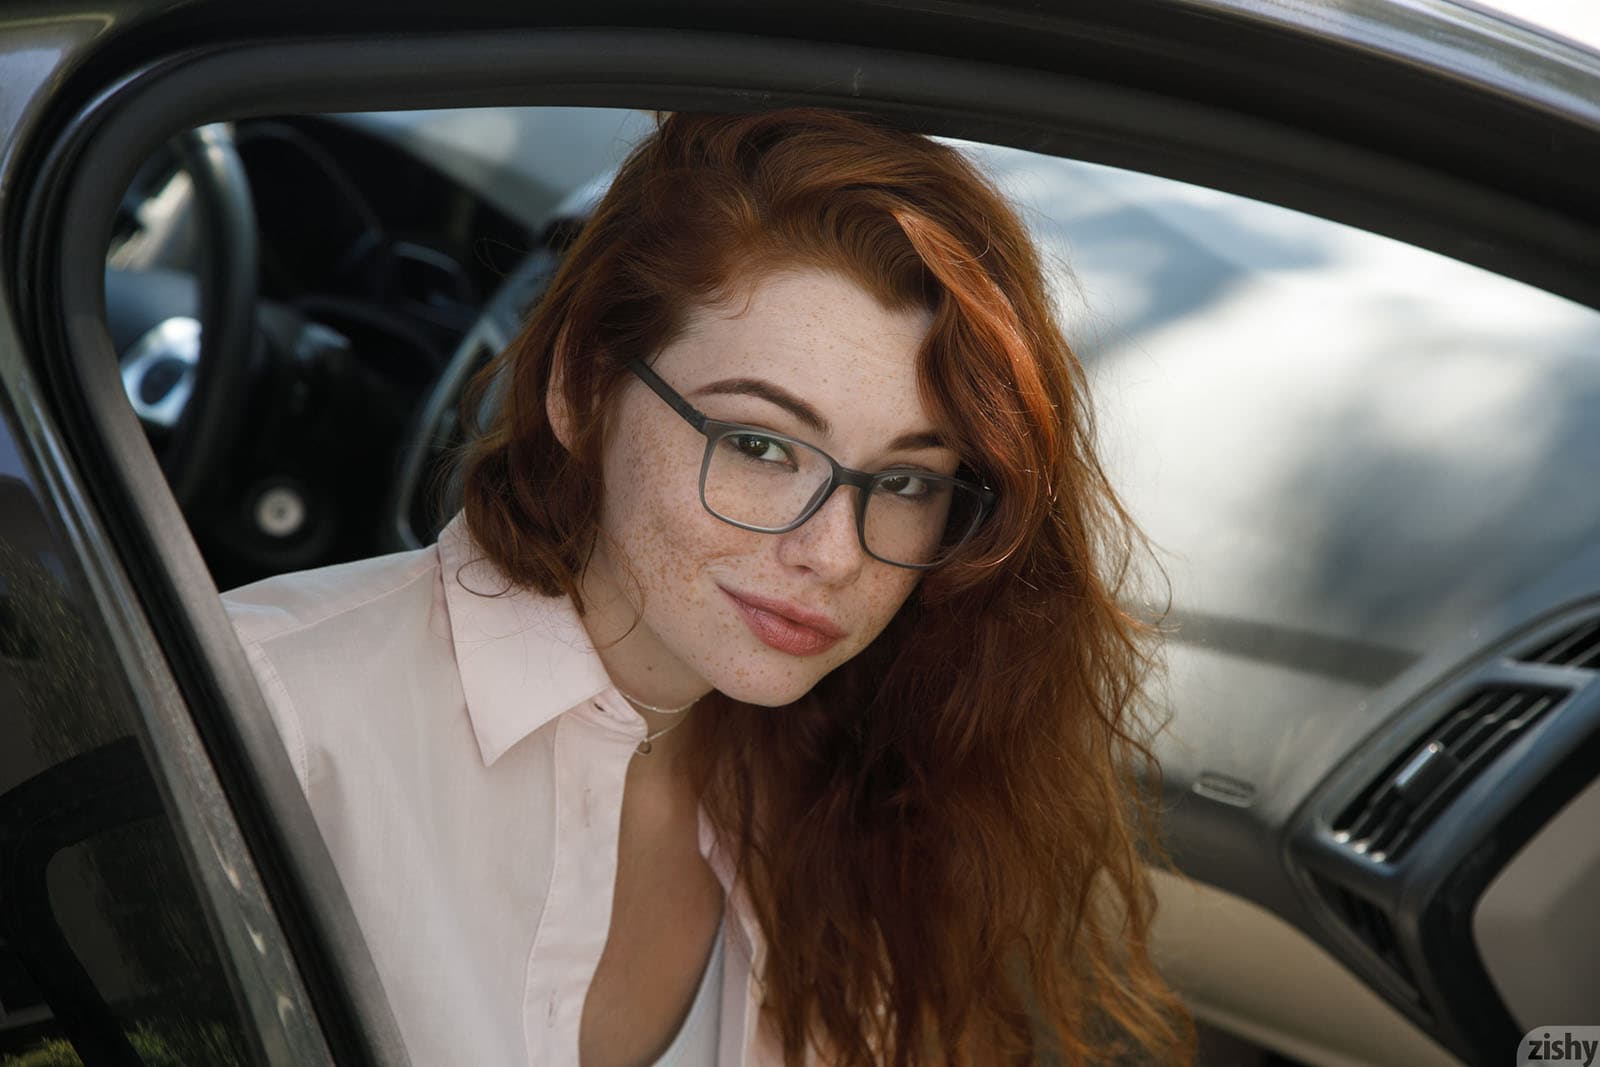 Sabrina Lynn Face Redhead Women With Glasses Smiling Long Hair Looking At Viewer Women